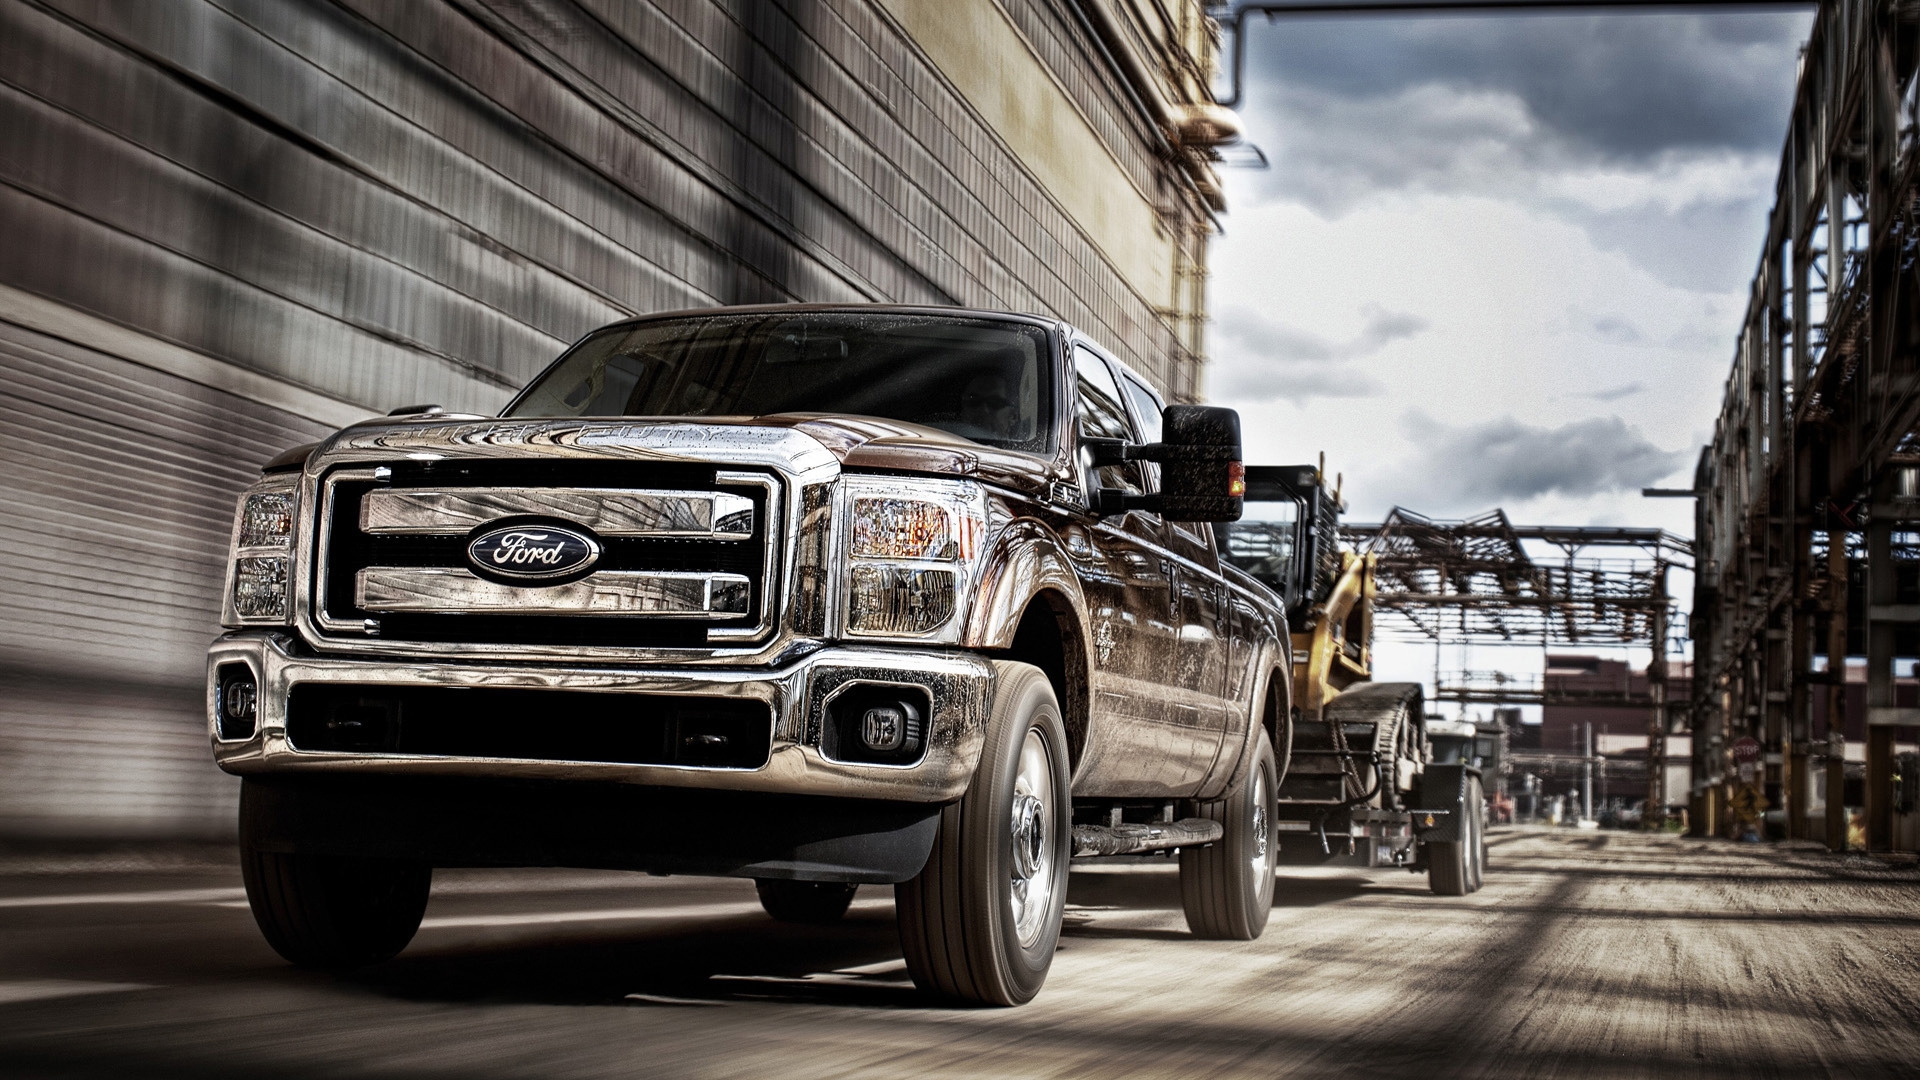 Ford F-Series Super Duty 2011 for 1920 x 1080 HDTV 1080p resolution